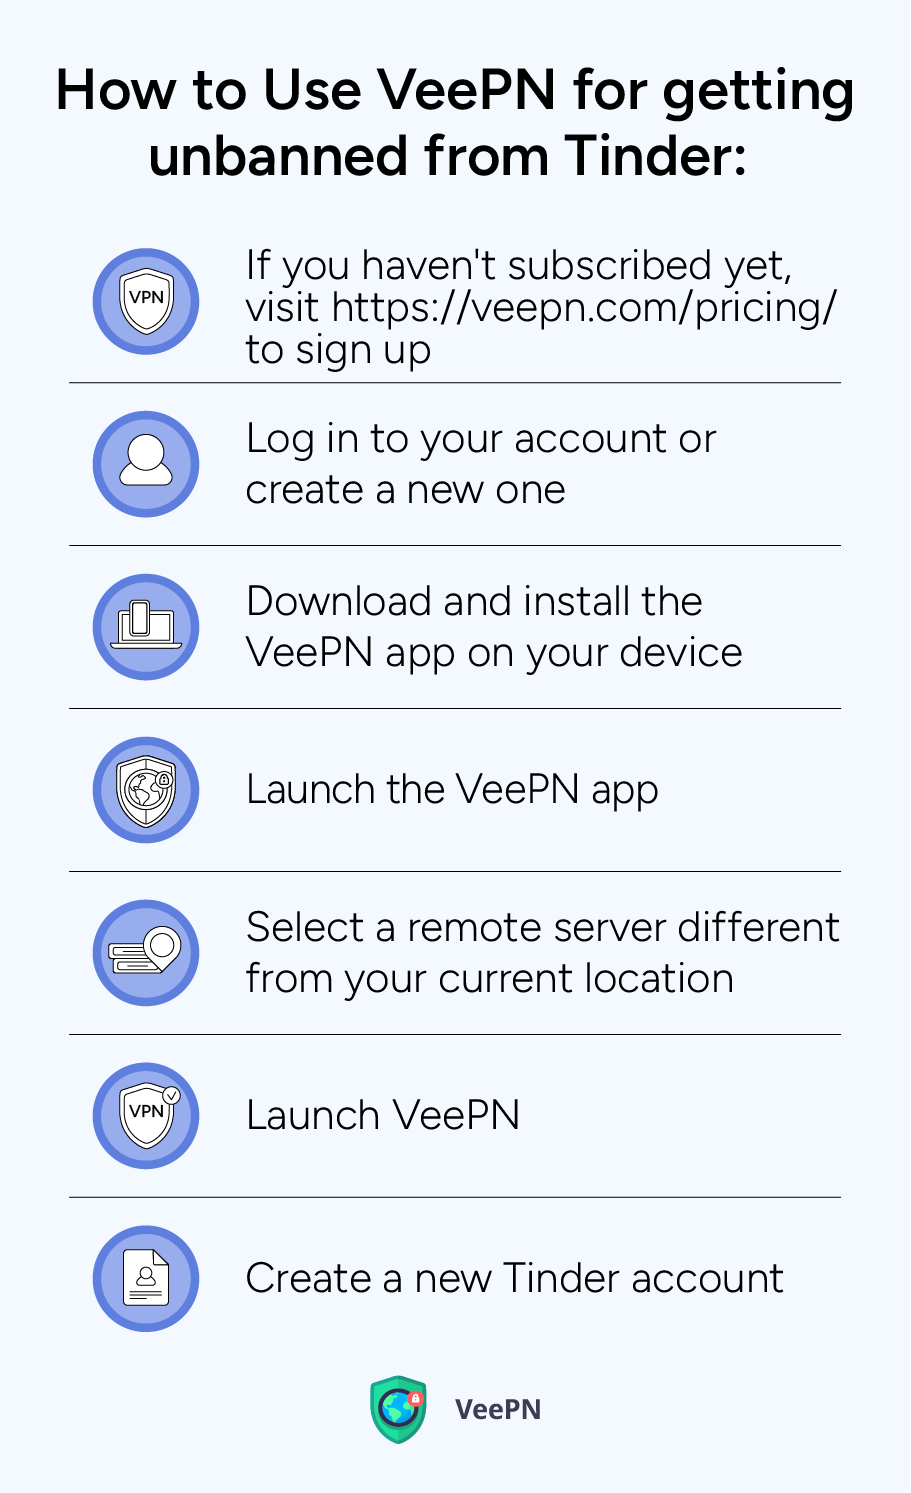 How to use VeePN for getting unbanned from Tinder